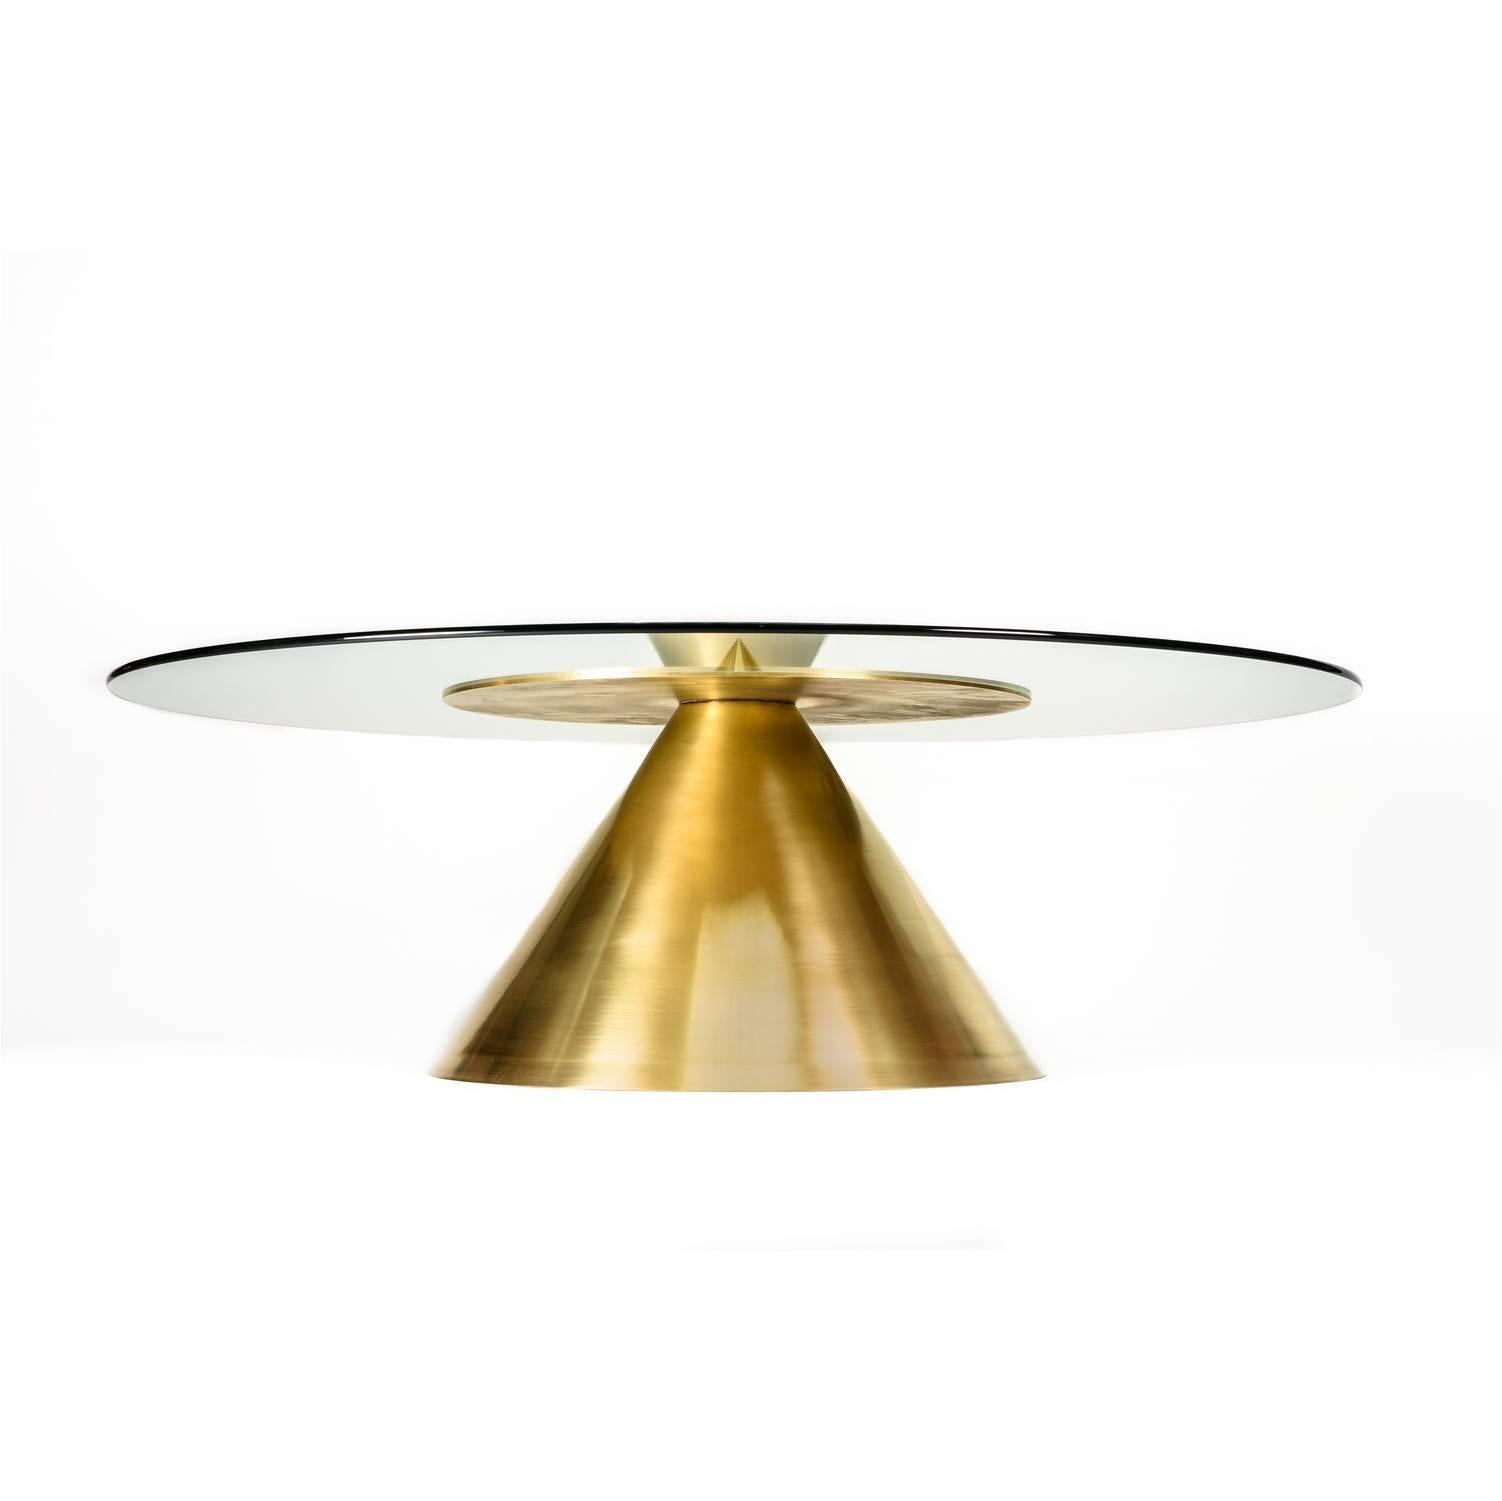 Not So General Gallery in Los Angeles is proud to present the Halo coffee table by Brooklyn-based design practice, Erickson Aesthetics which appears to be a feat of product design and engineering.

The pinnacle of the cone-shaped brass-plated Steel